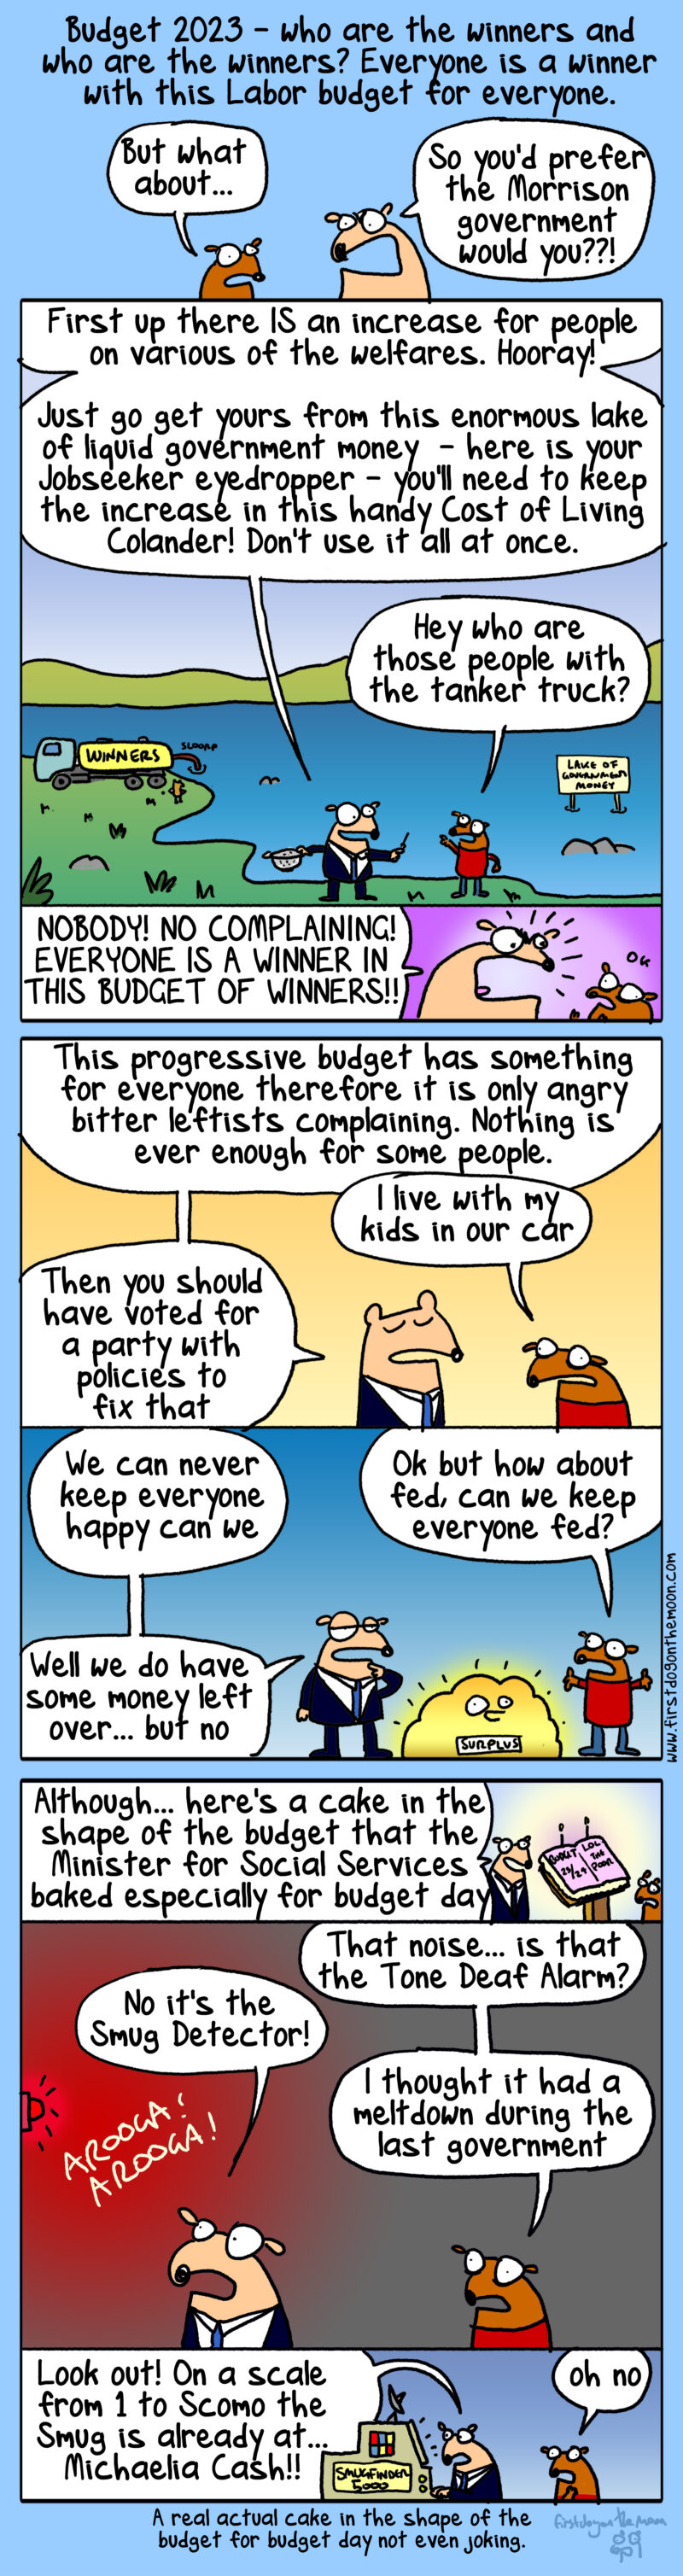 No complaining! Everyone is a winner with this Labor budget!